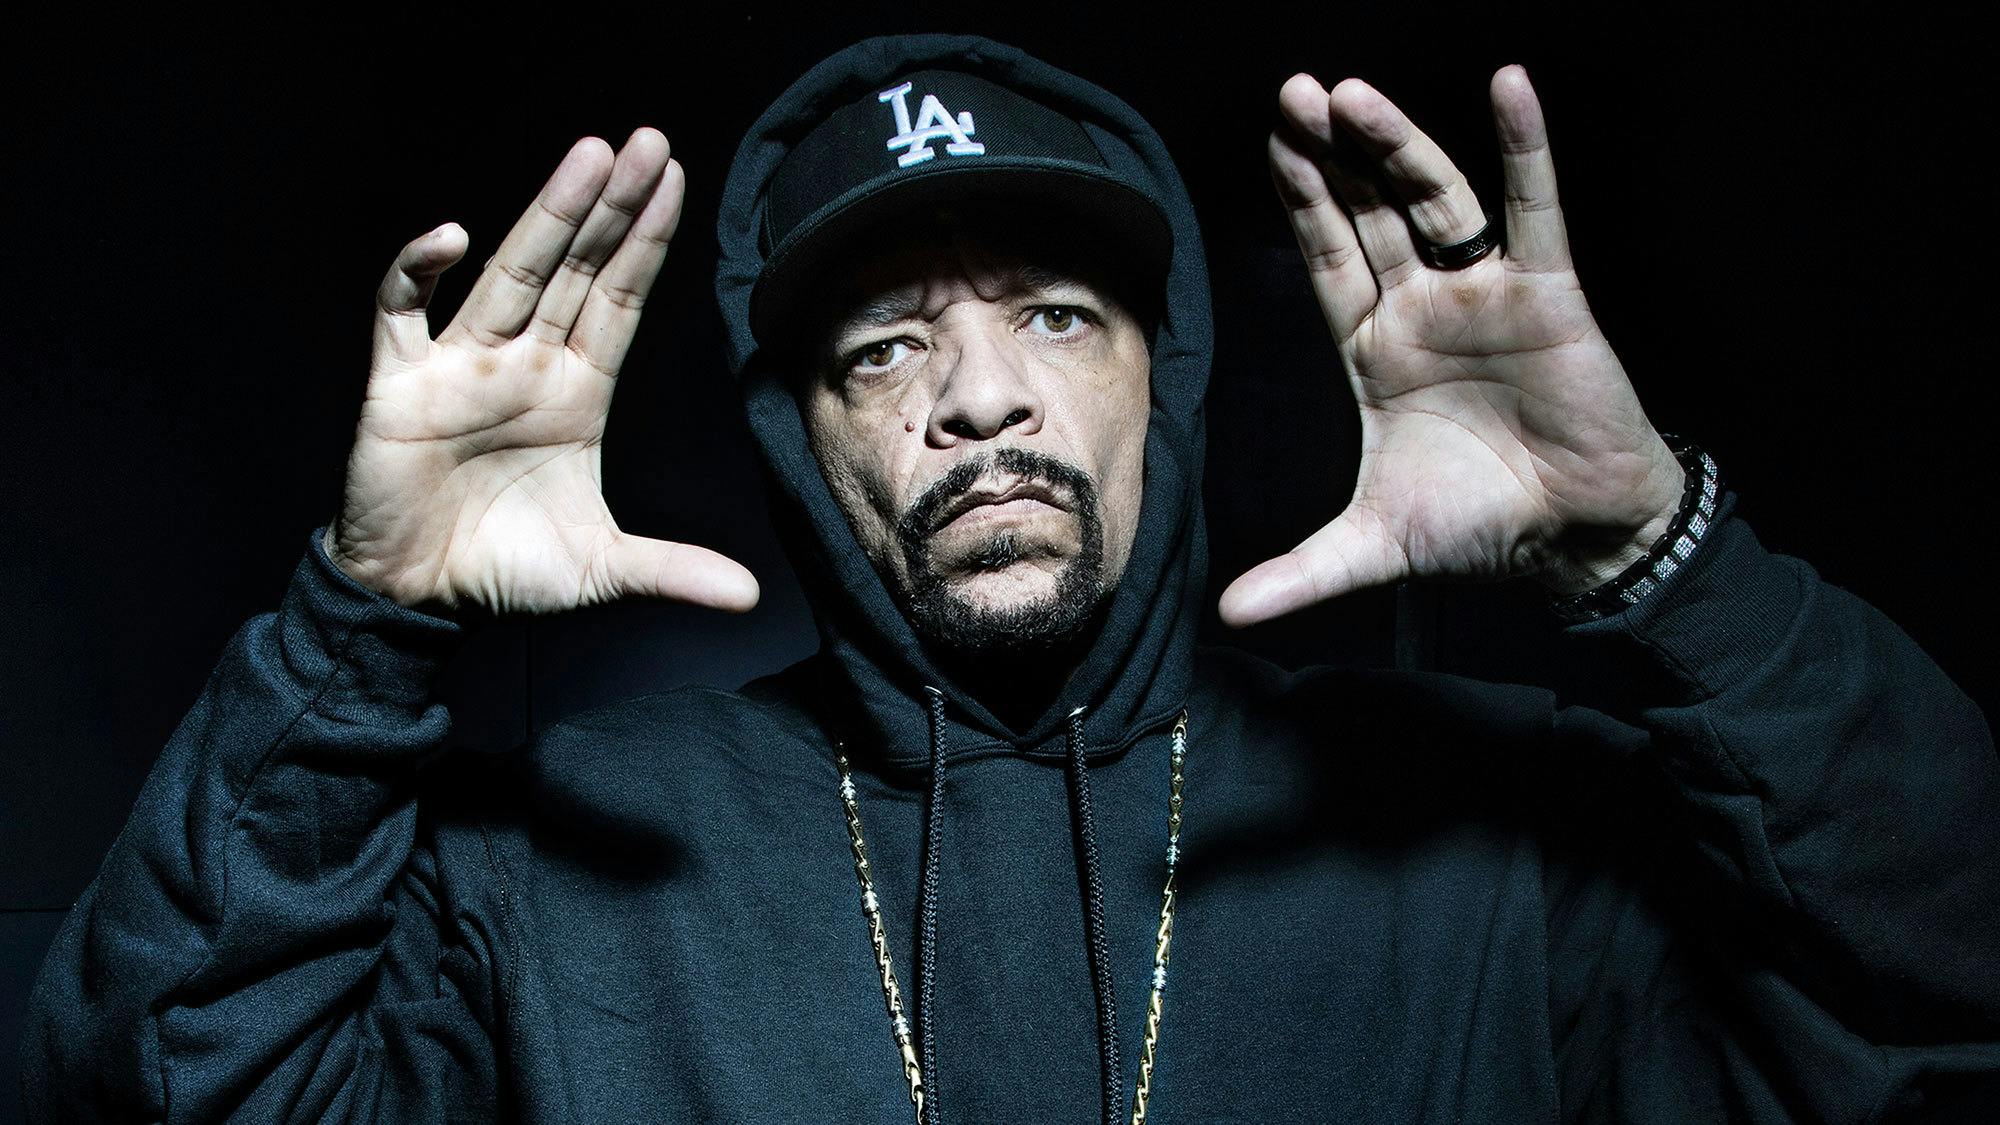 Ice-T: "I play one on TV, but cops can still kiss my ass"